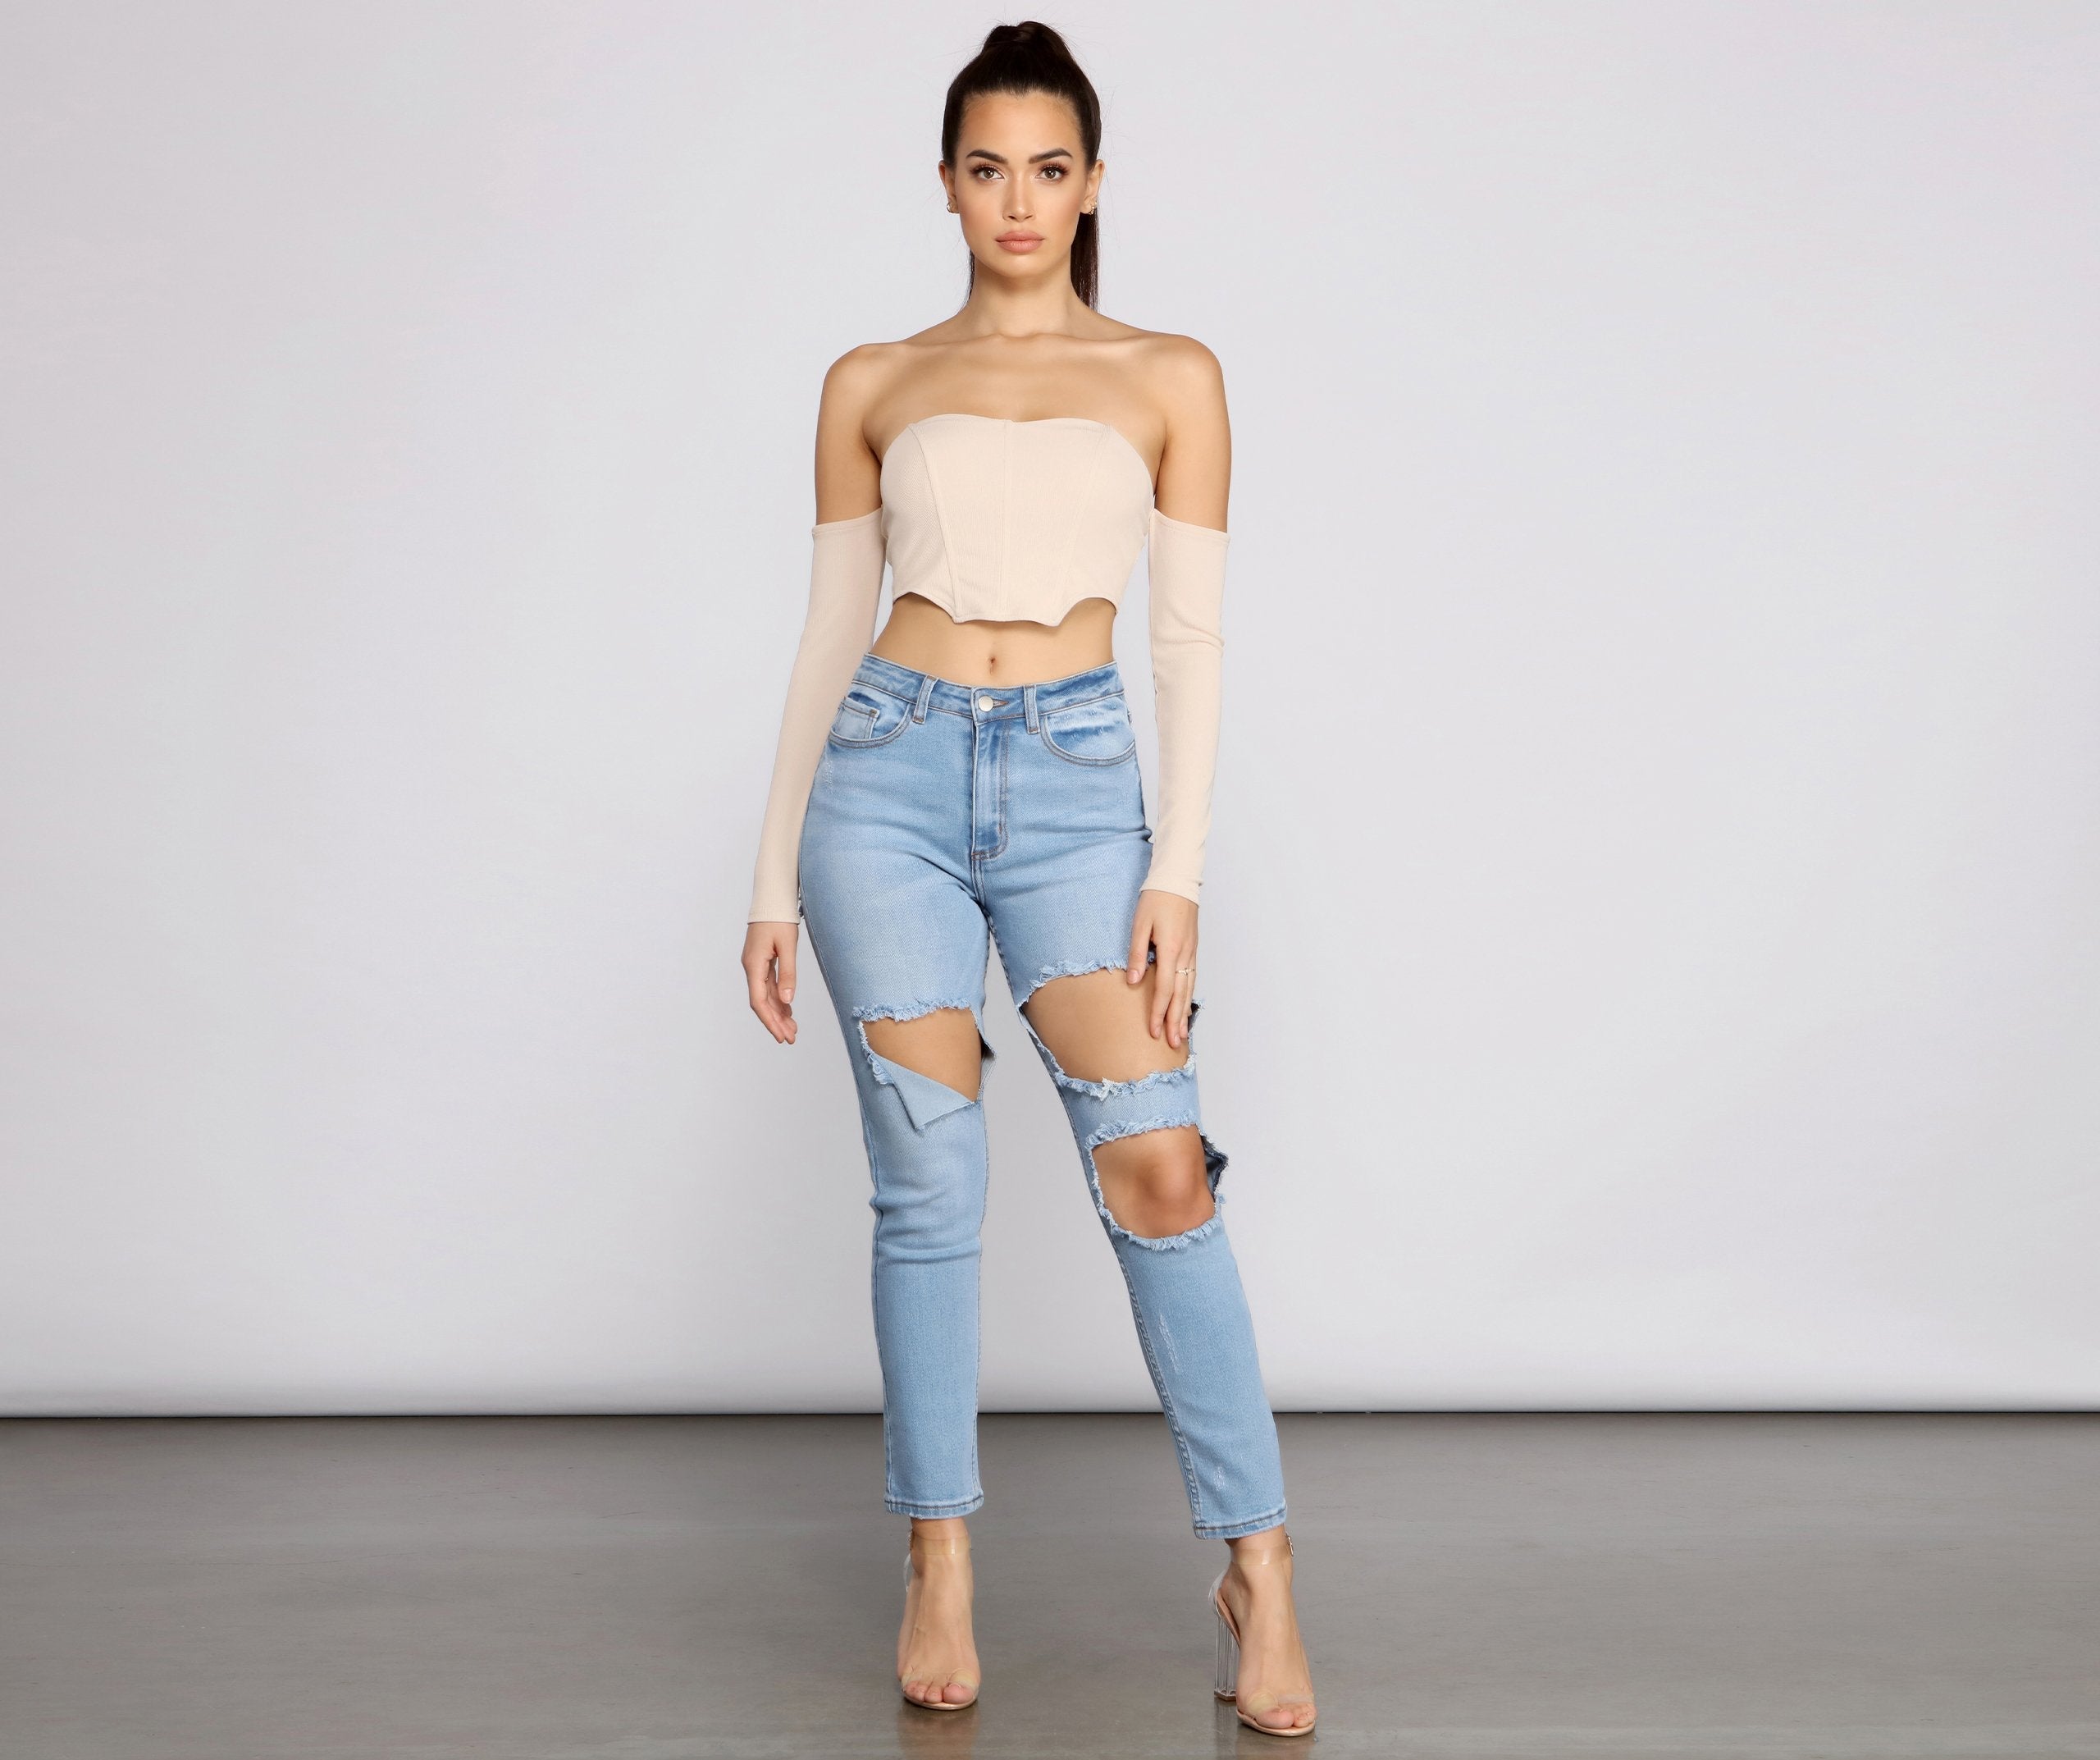 High Waist Trendy Cut Out Skinny Jeans - Lady Occasions